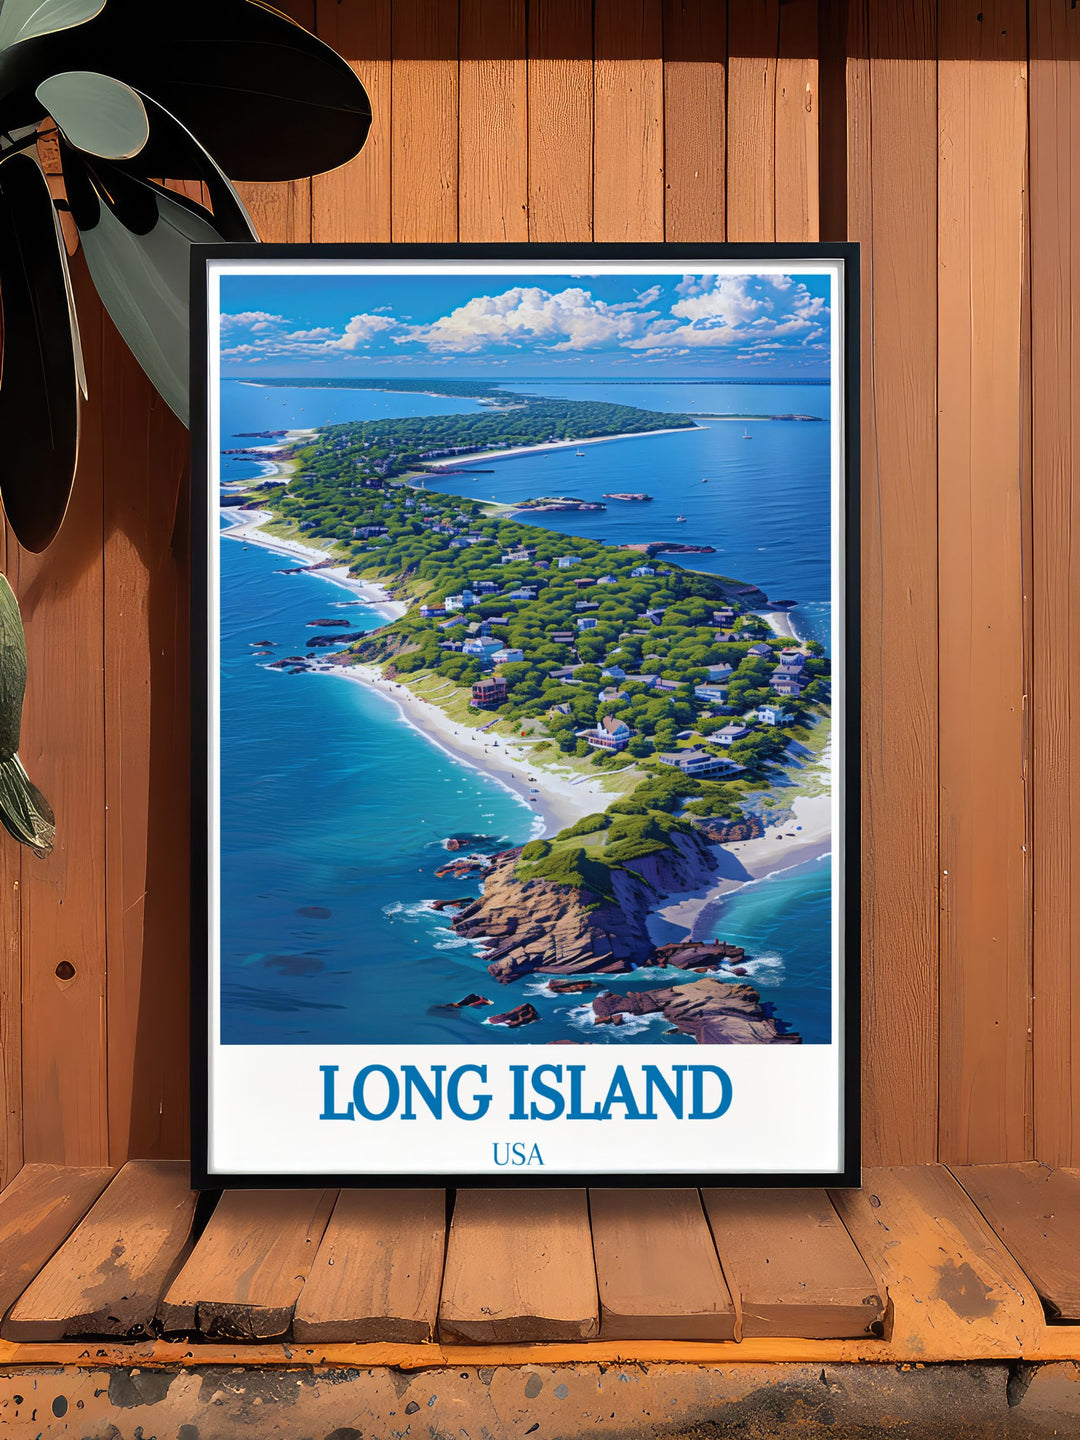 Featuring the expansive beaches and vibrant communities of Long Island, this poster showcases the islands inviting landscapes, perfect for those who cherish coastal living.